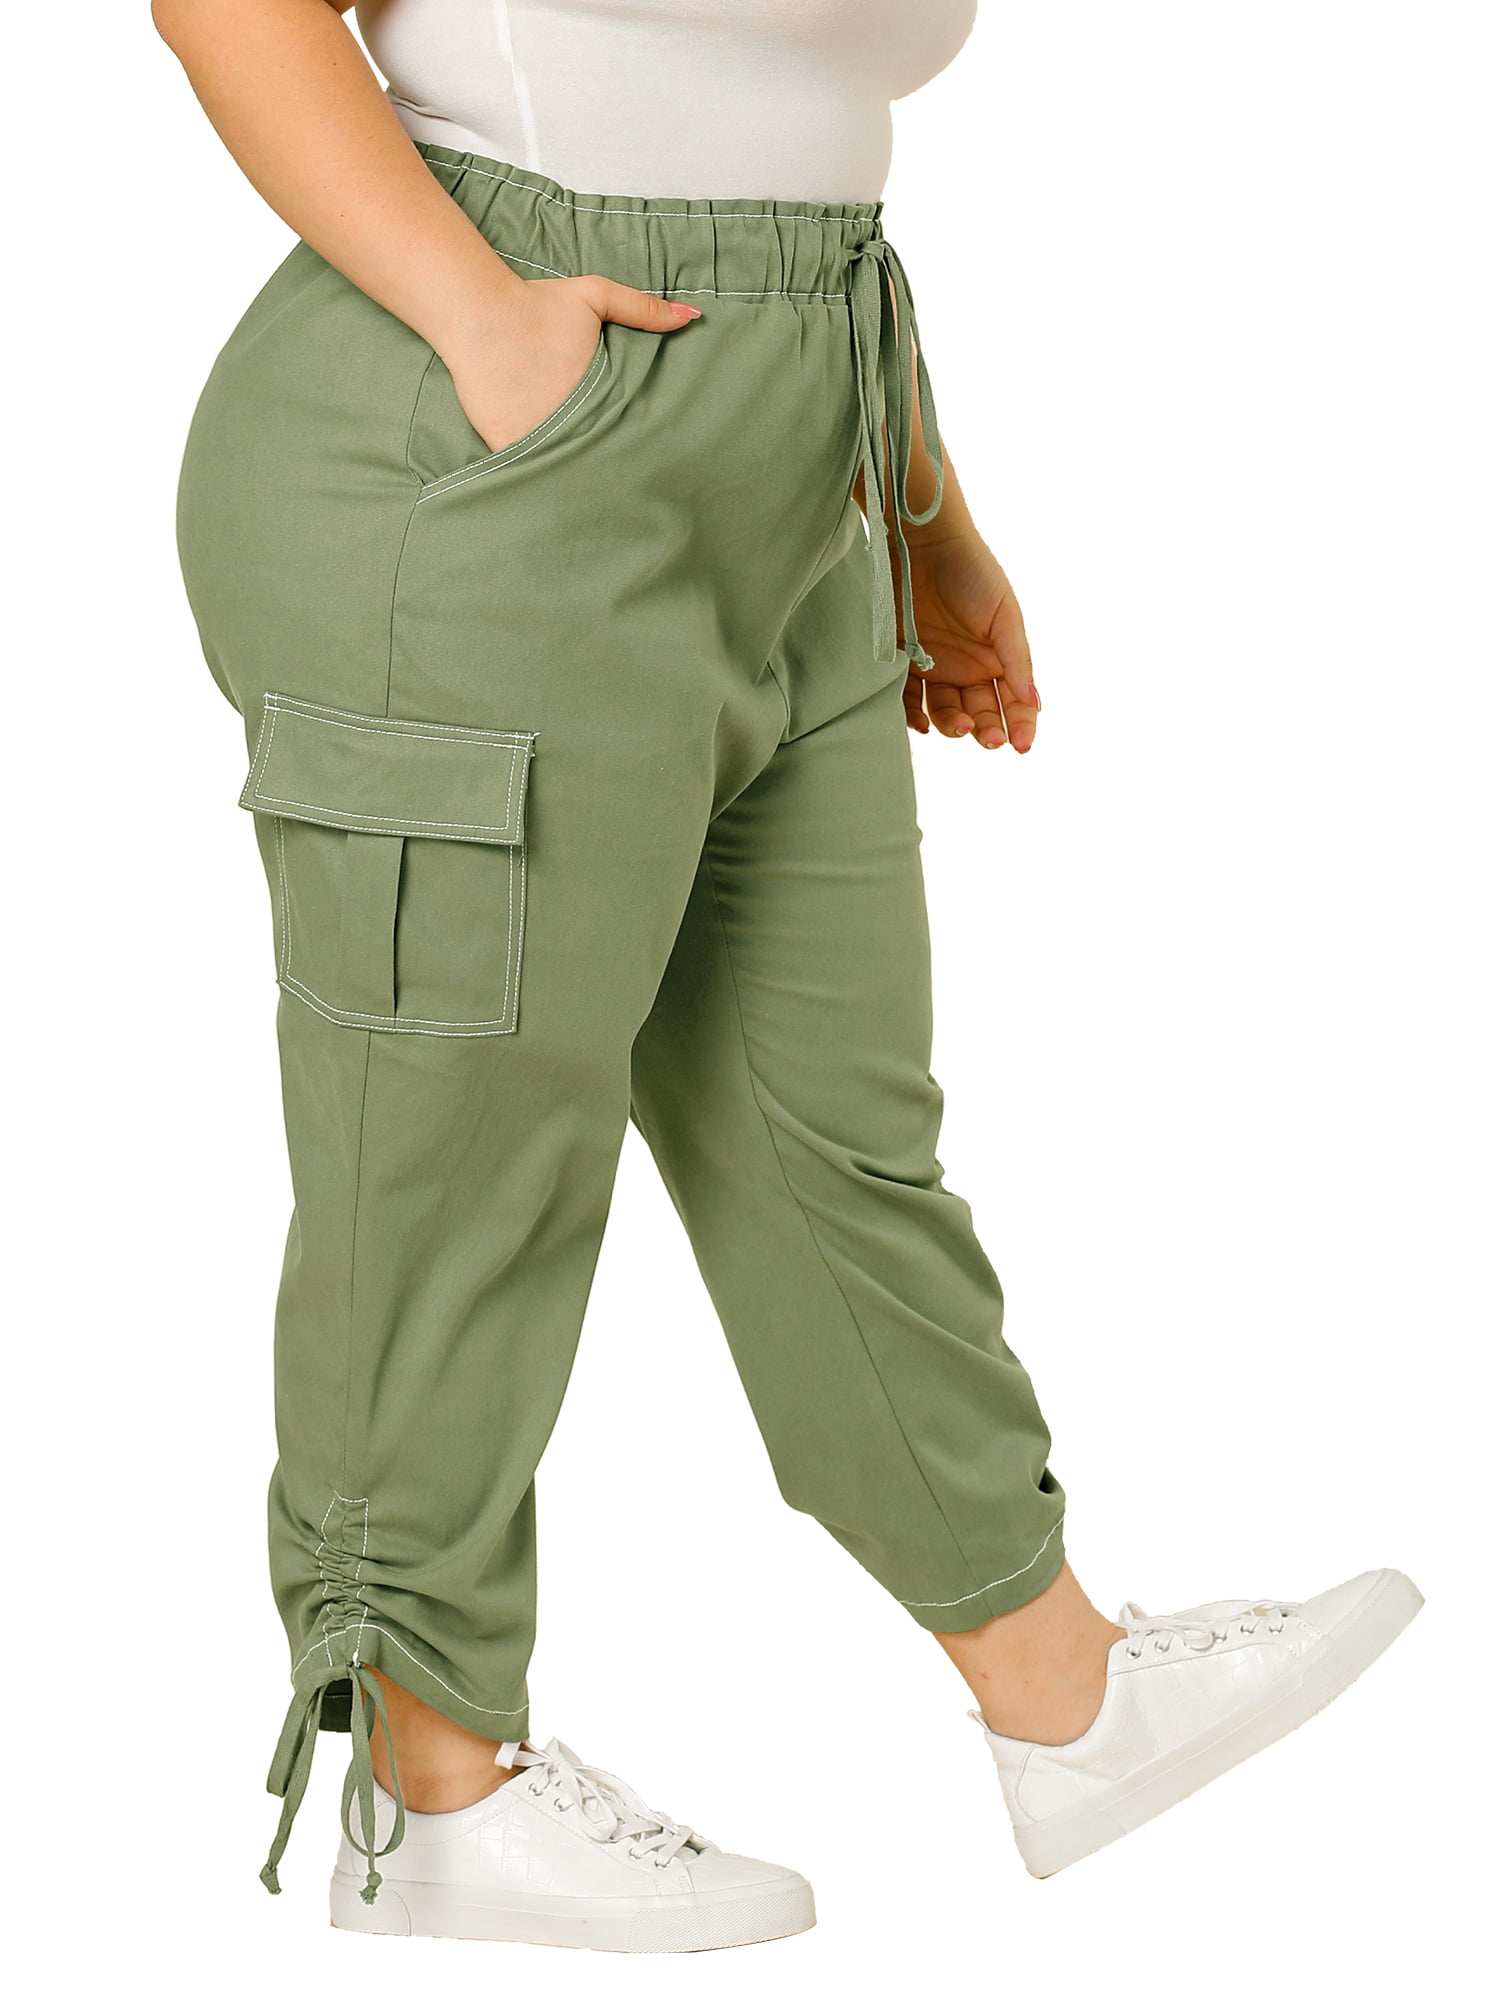 Ellos Women's Plus Size Stretch Cargo Capris, Front and Side Pockets